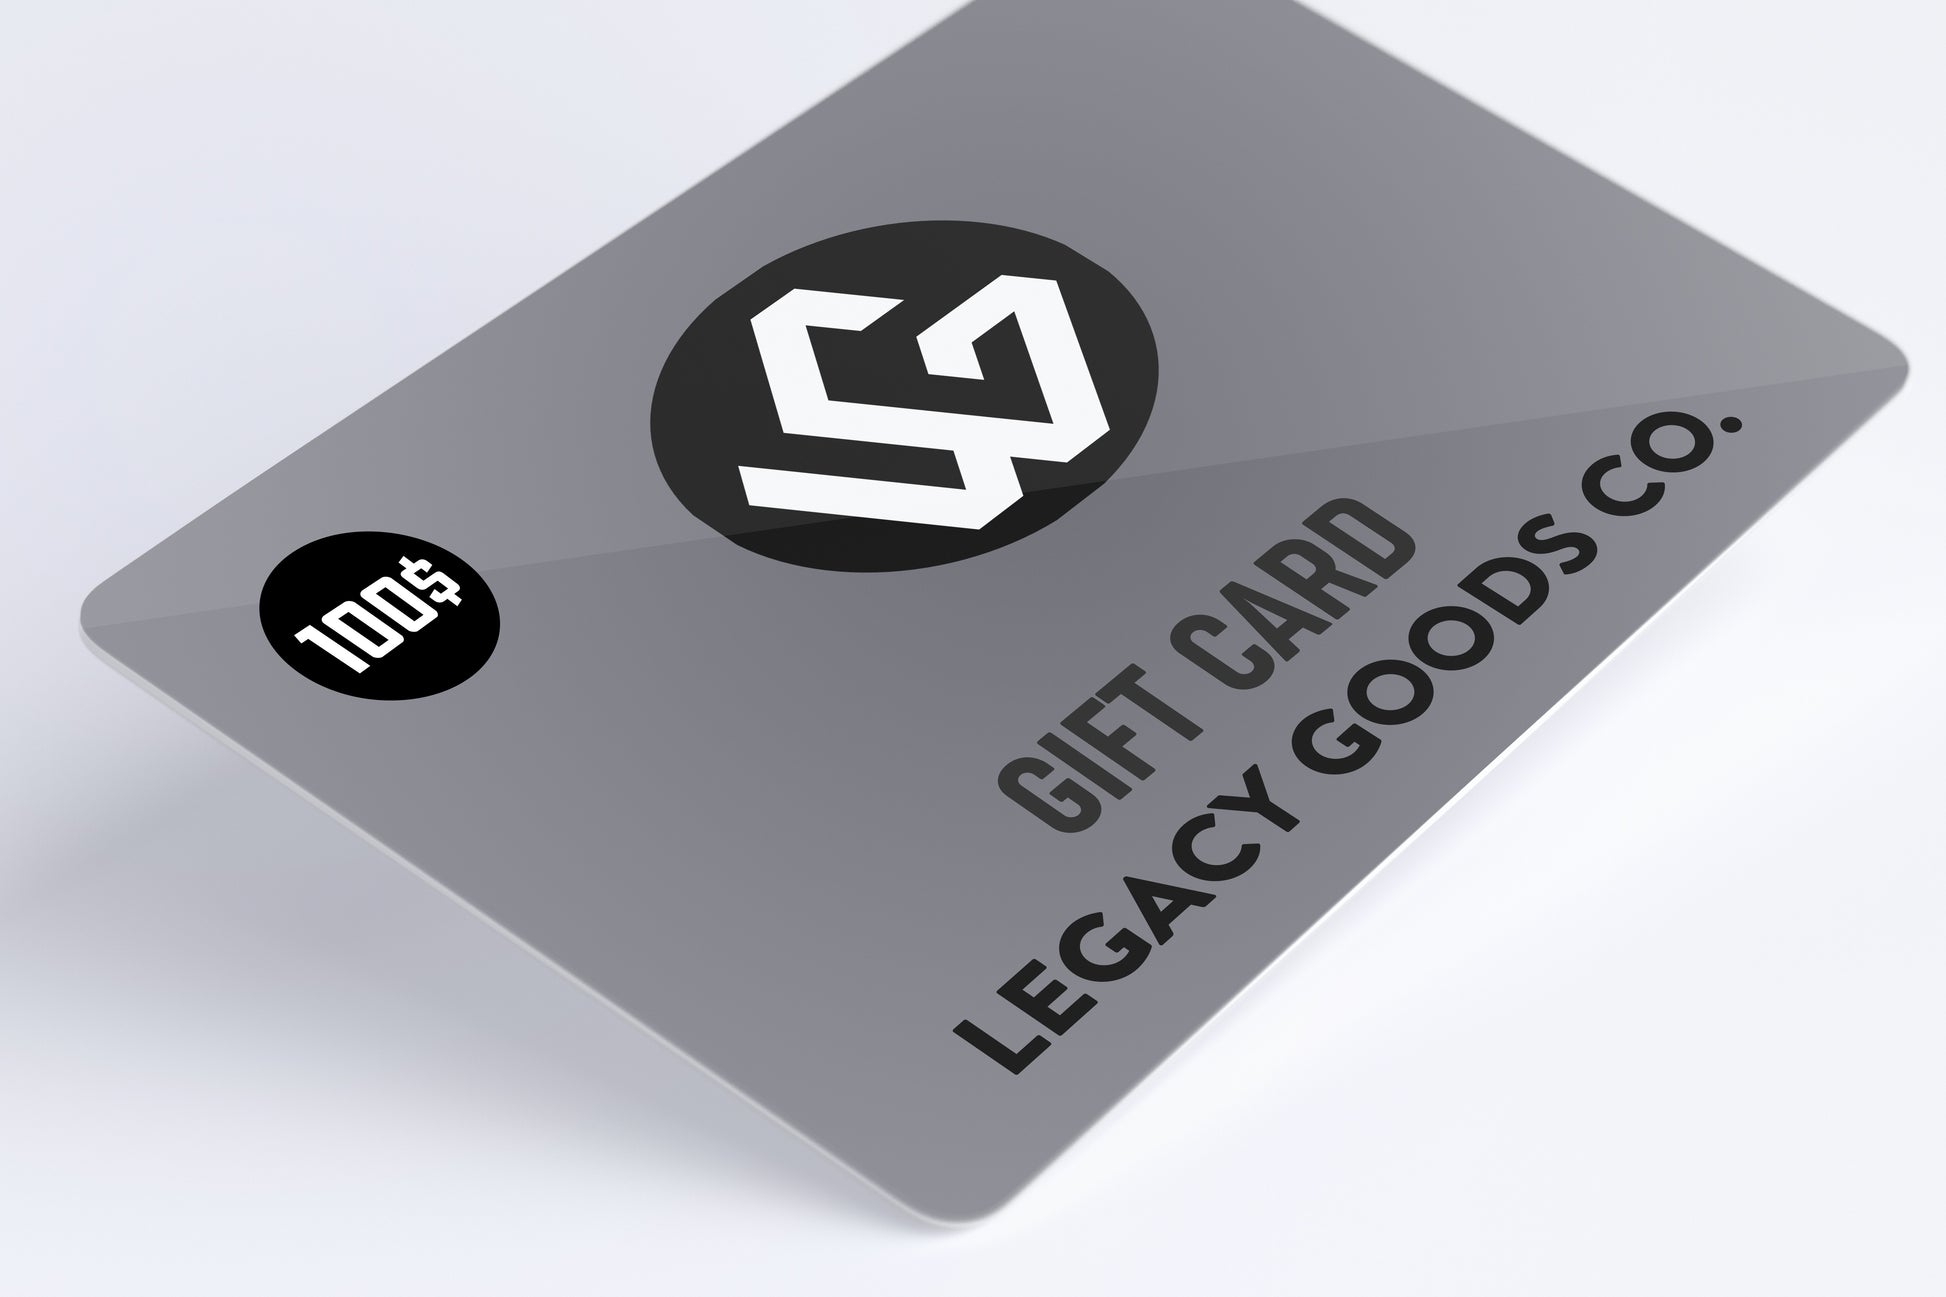 The 100$ Legacy Goods Gift Card!